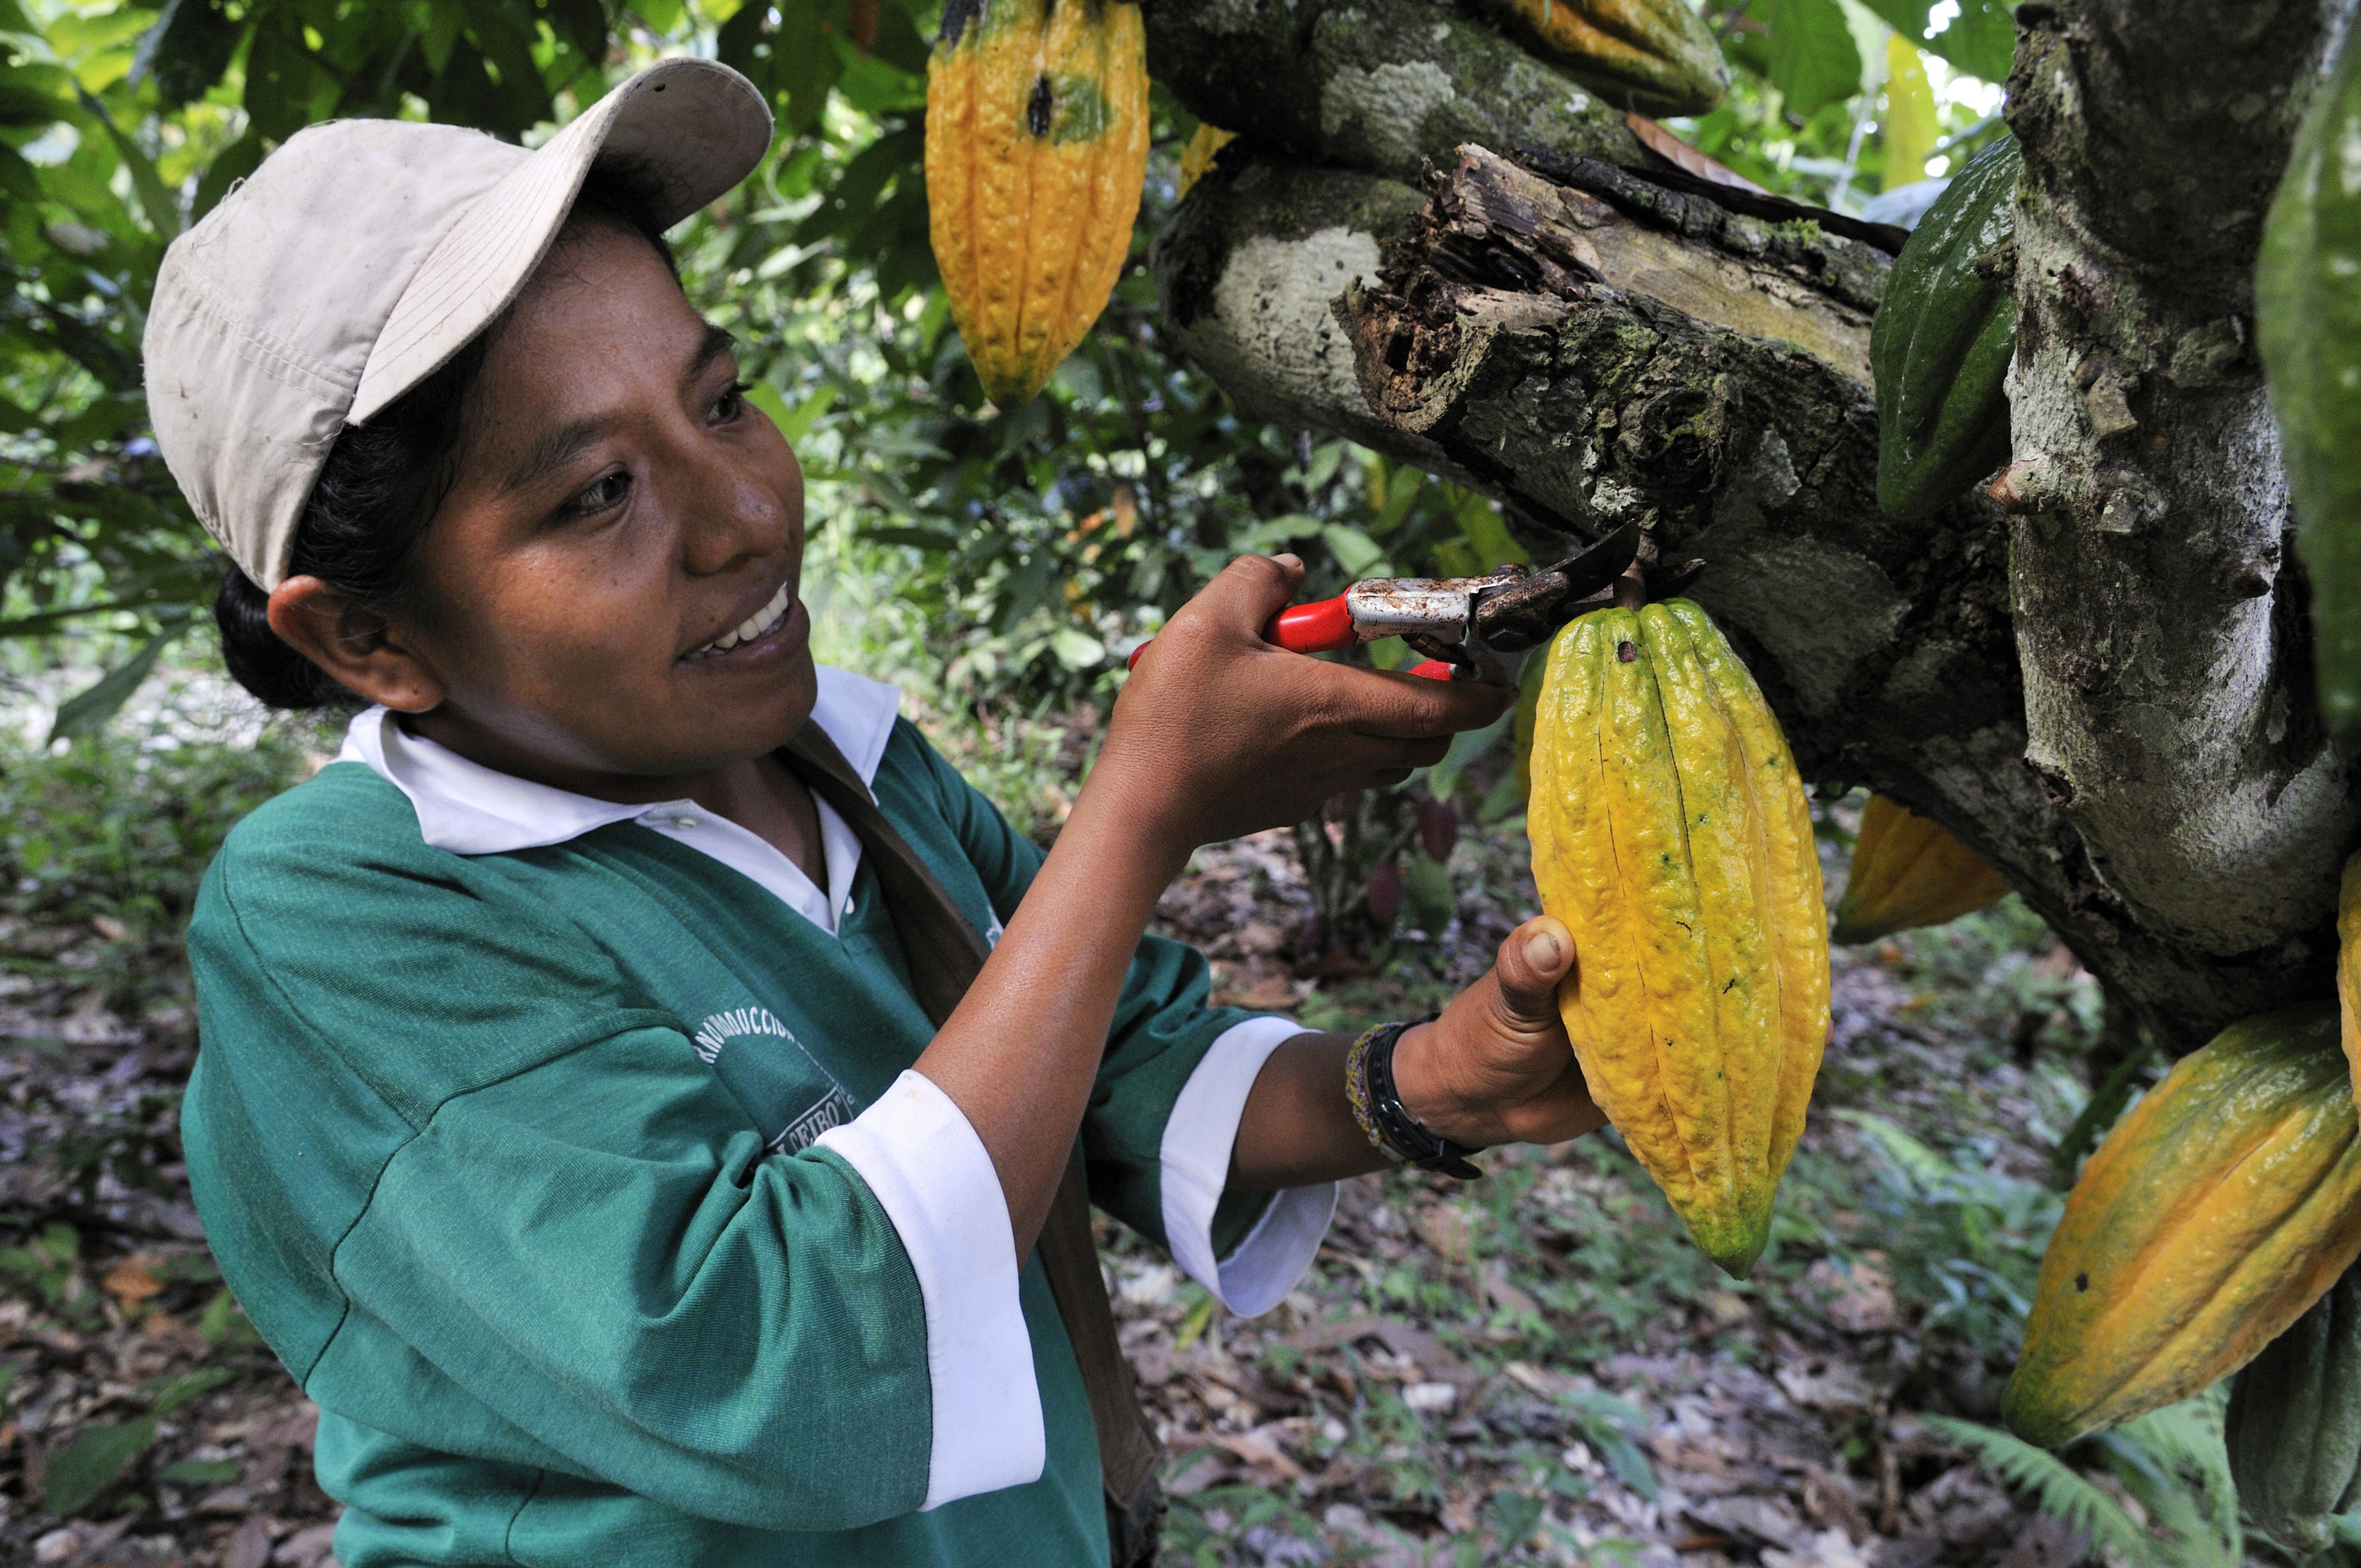 A harvester cuts cocoa bean pods from a tree in Sapecho, Bolivia